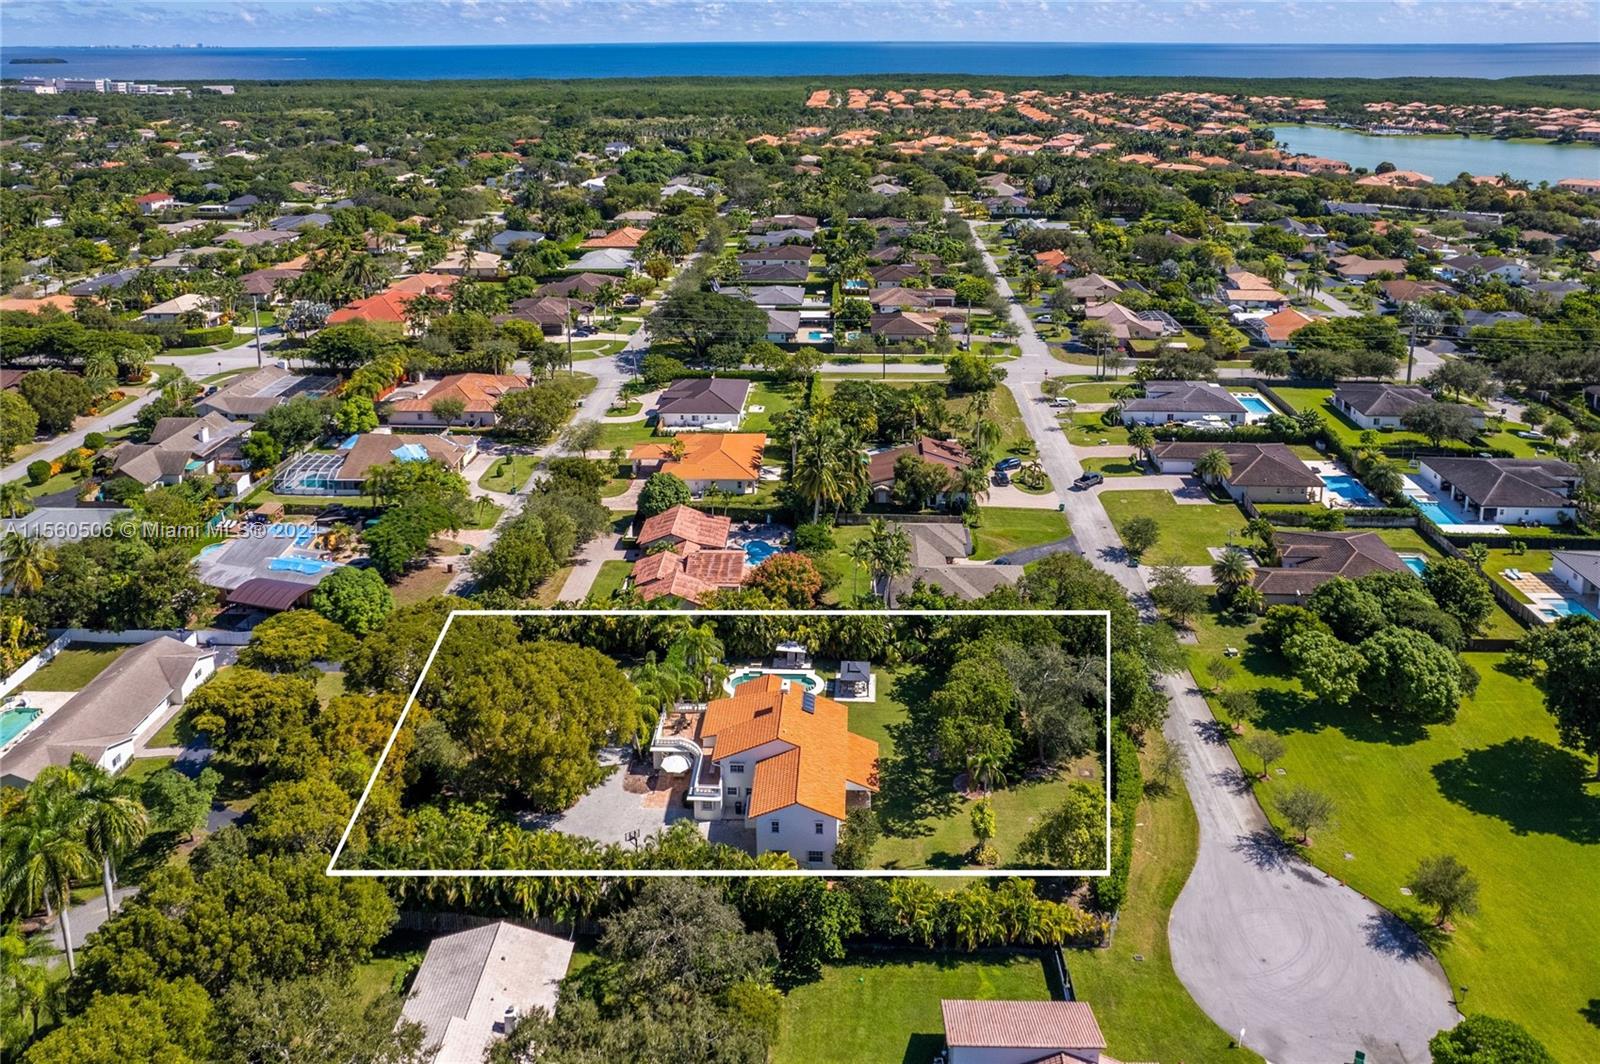 This stunning two-story single-family residence is situated on a rare, expansive lot spanning nearly an acre in Cutler Bay. It boasts an enormous circular driveway just minutes away from Black Point Marina and Biscayne Bay. This exceptional 4-bedroom, 4.5-bathroom home showcases high vaulted ceilings, a modernized kitchen, a staircase with sleek glass railing, a spa like main bathroom, abundant natural light, a 2-car garage, and a picturesque tropical oasis complete with a pool surrounded by palm trees and exotic foliage. The grounds offer ample space for recreation, entertaining, or simply basking in the glorious Florida climate. Don't let this incredible opportunity slip away to own your very own piece of paradise in South Florida with such a remarkably spacious lot size.